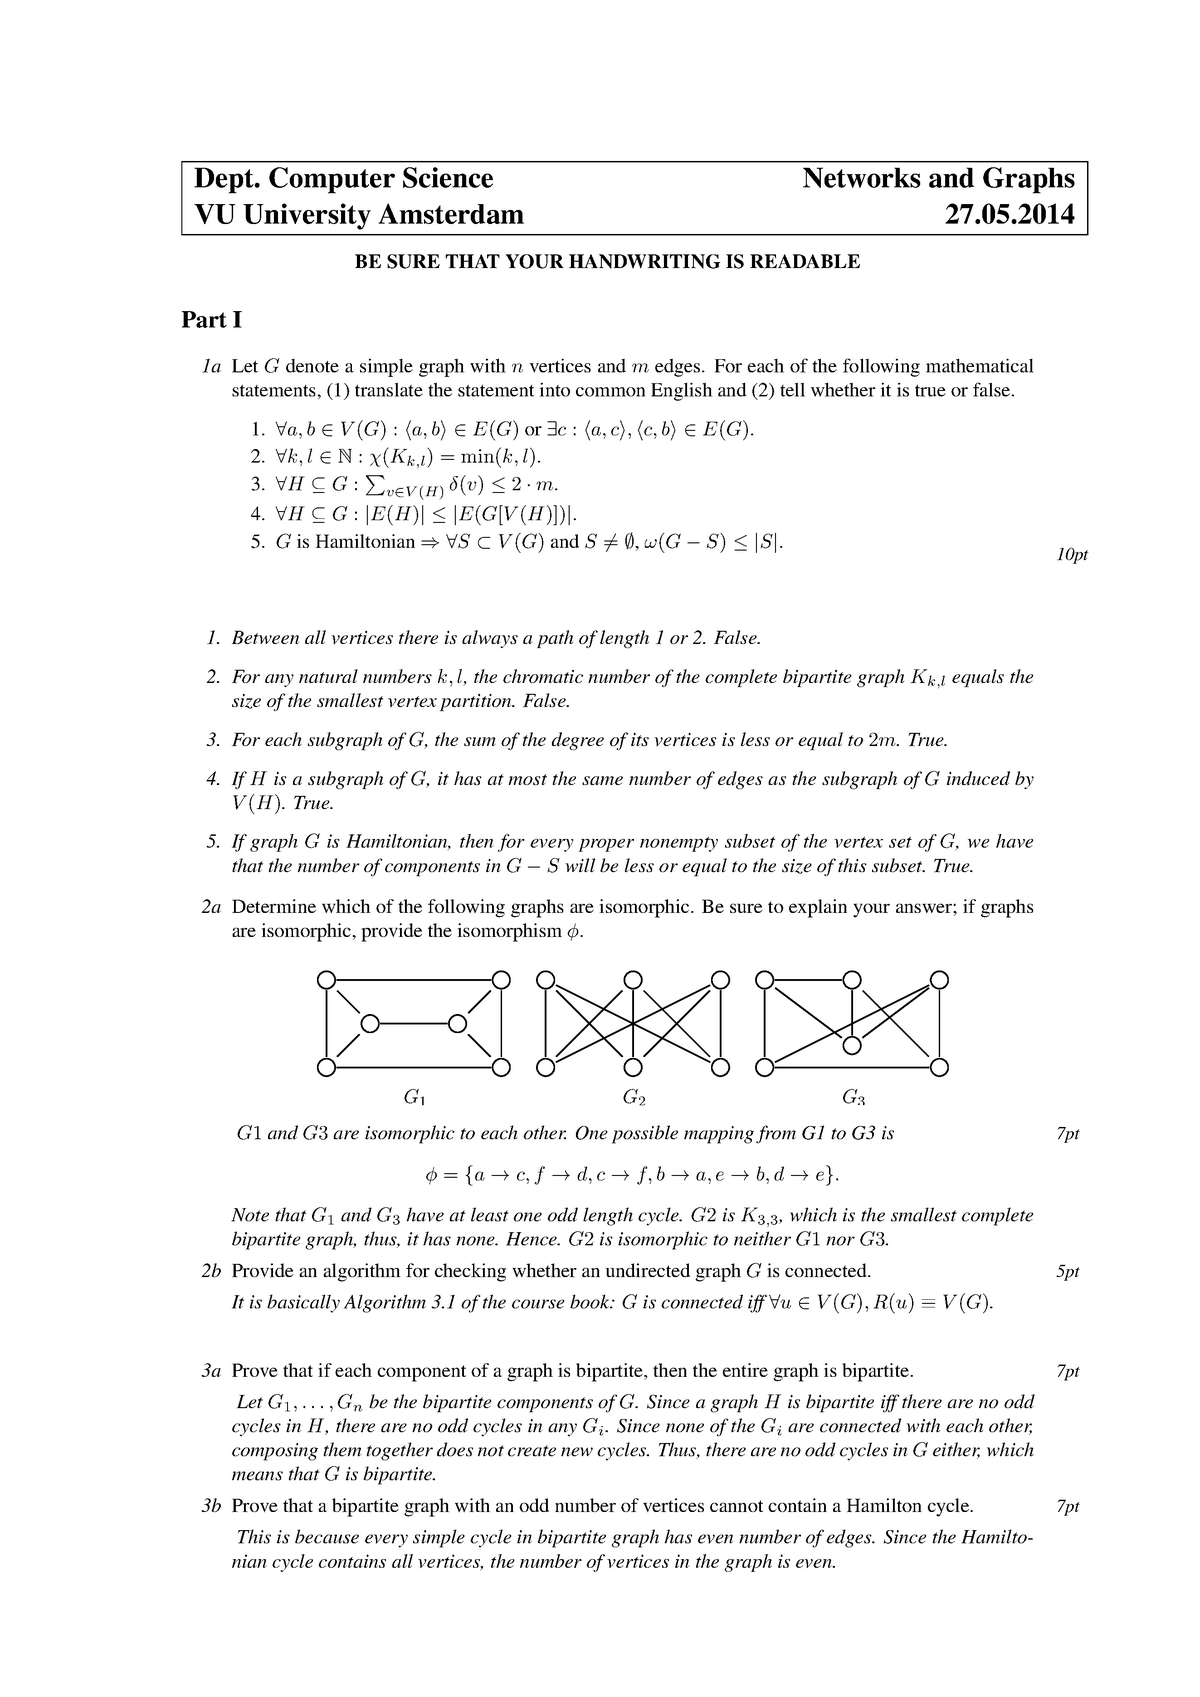 Exam 27 June 14 Questions And Answers Dept Computer Science Networks And Graphs Vu University Amsterdam 27 05 Be Sure That Your Handwriting Is Readable Part Studeersnel